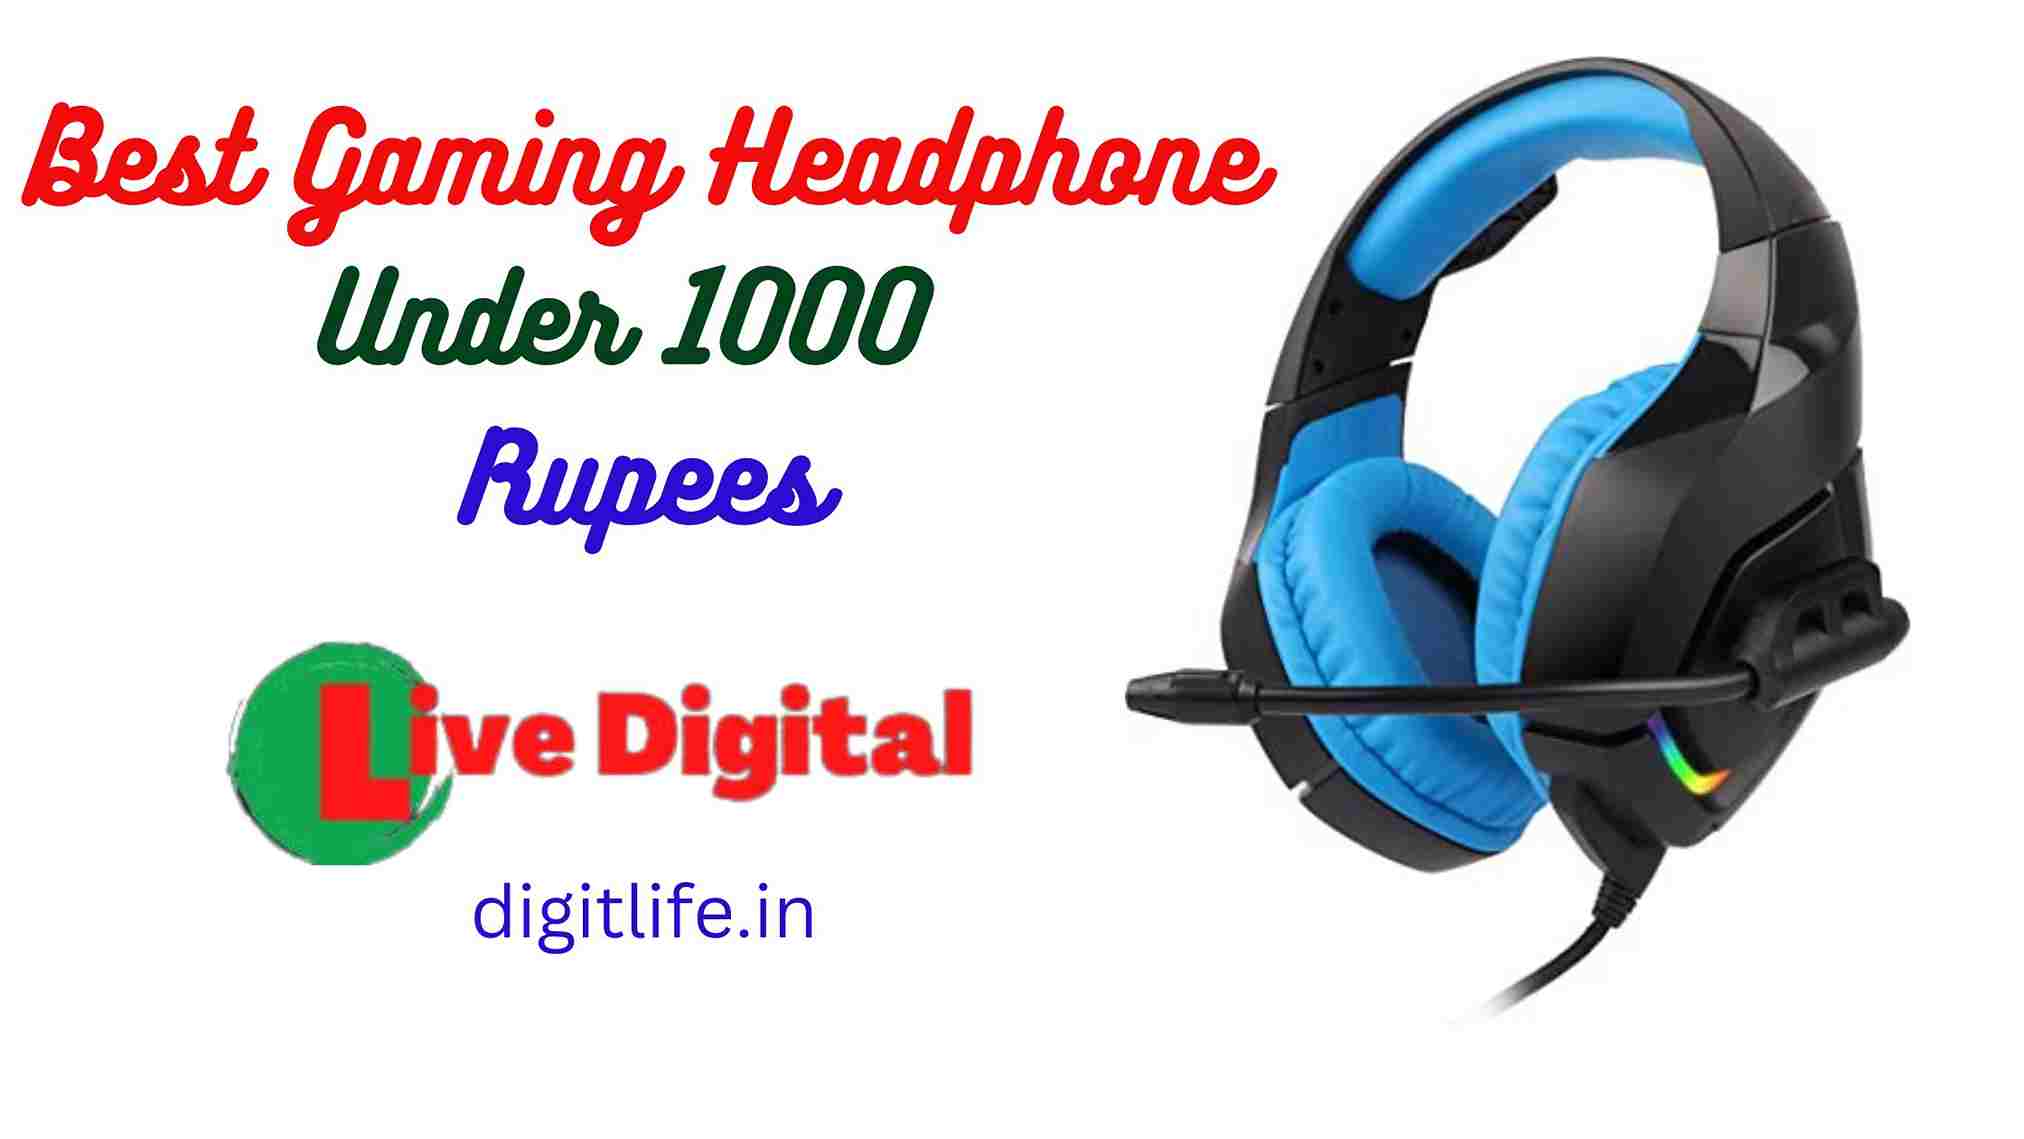 Best Gaming Headphone Under 1000 Rs in India